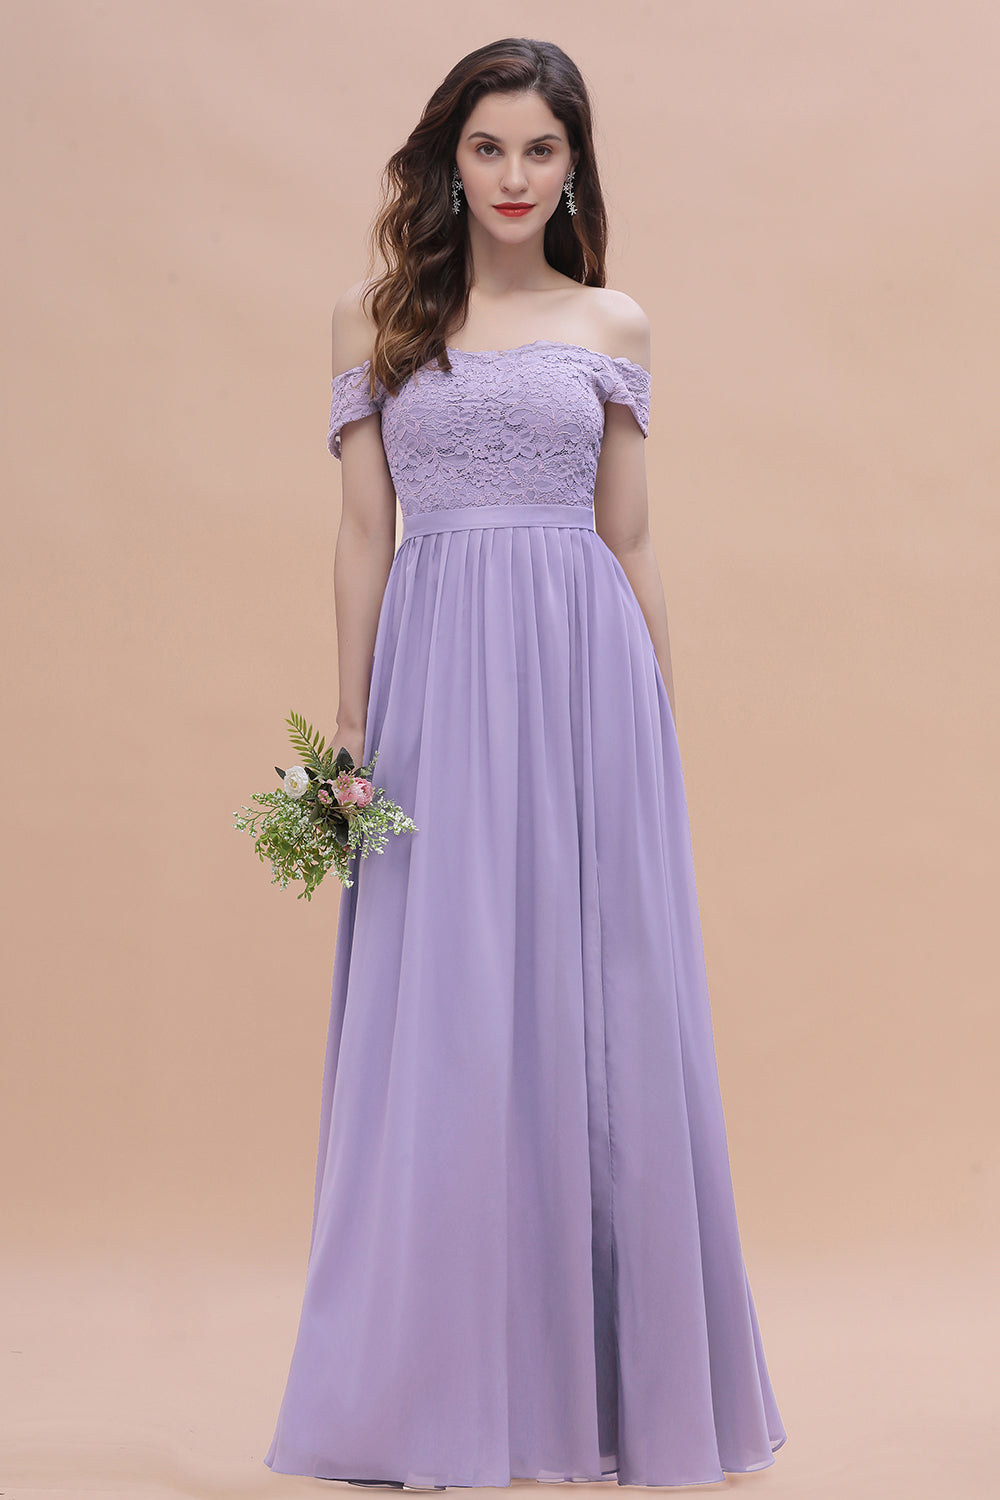 Sexy Off-the-Shoulder Lace Chiffon Ruffles Bridesmaid Dress with Slit On Sale-27dress